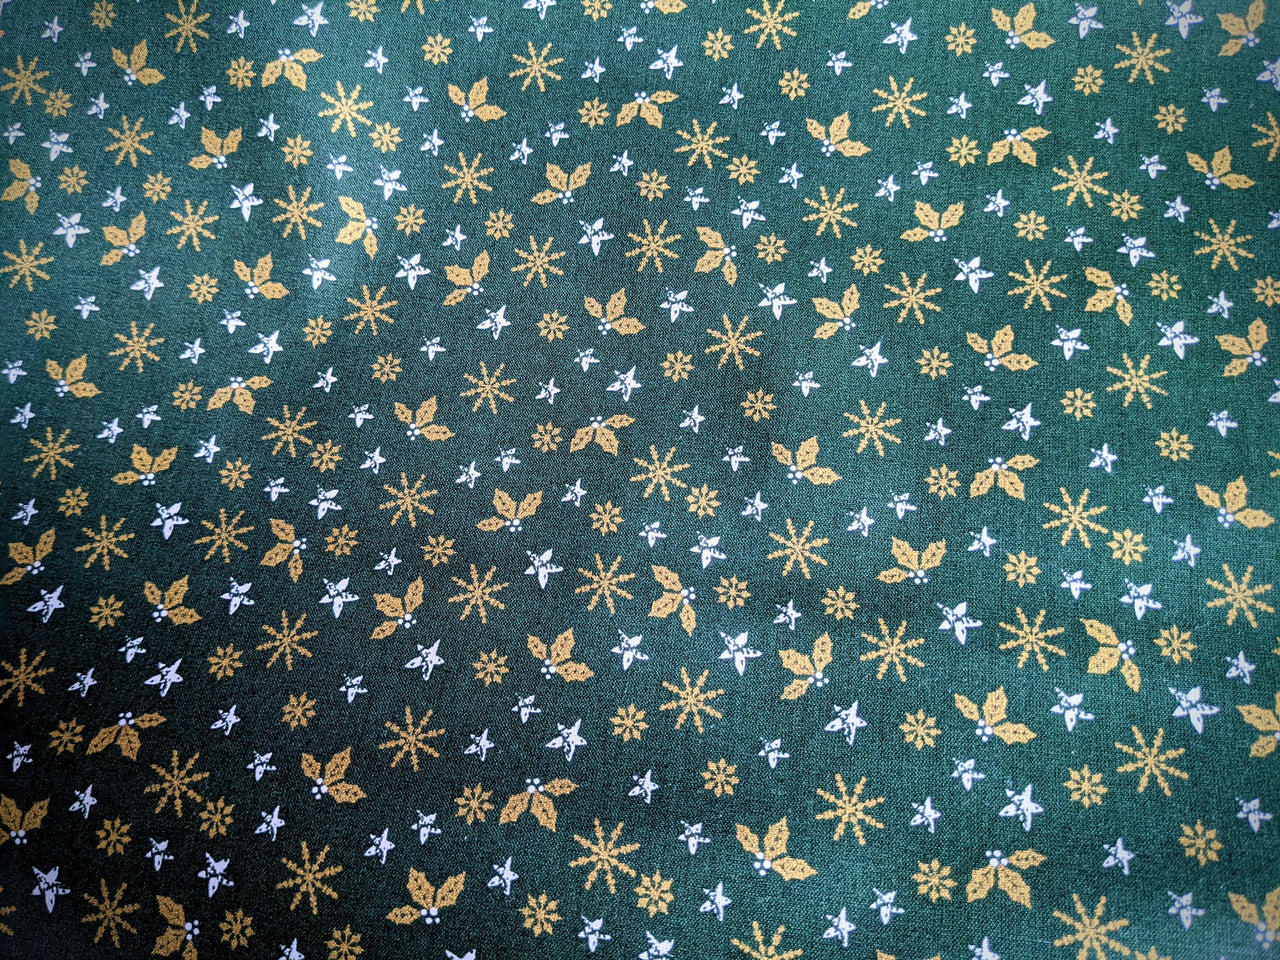 Green Cotton Holly Leaves Snowflakes Christmas Fabric, Festive Fabric, Holiday Fabric